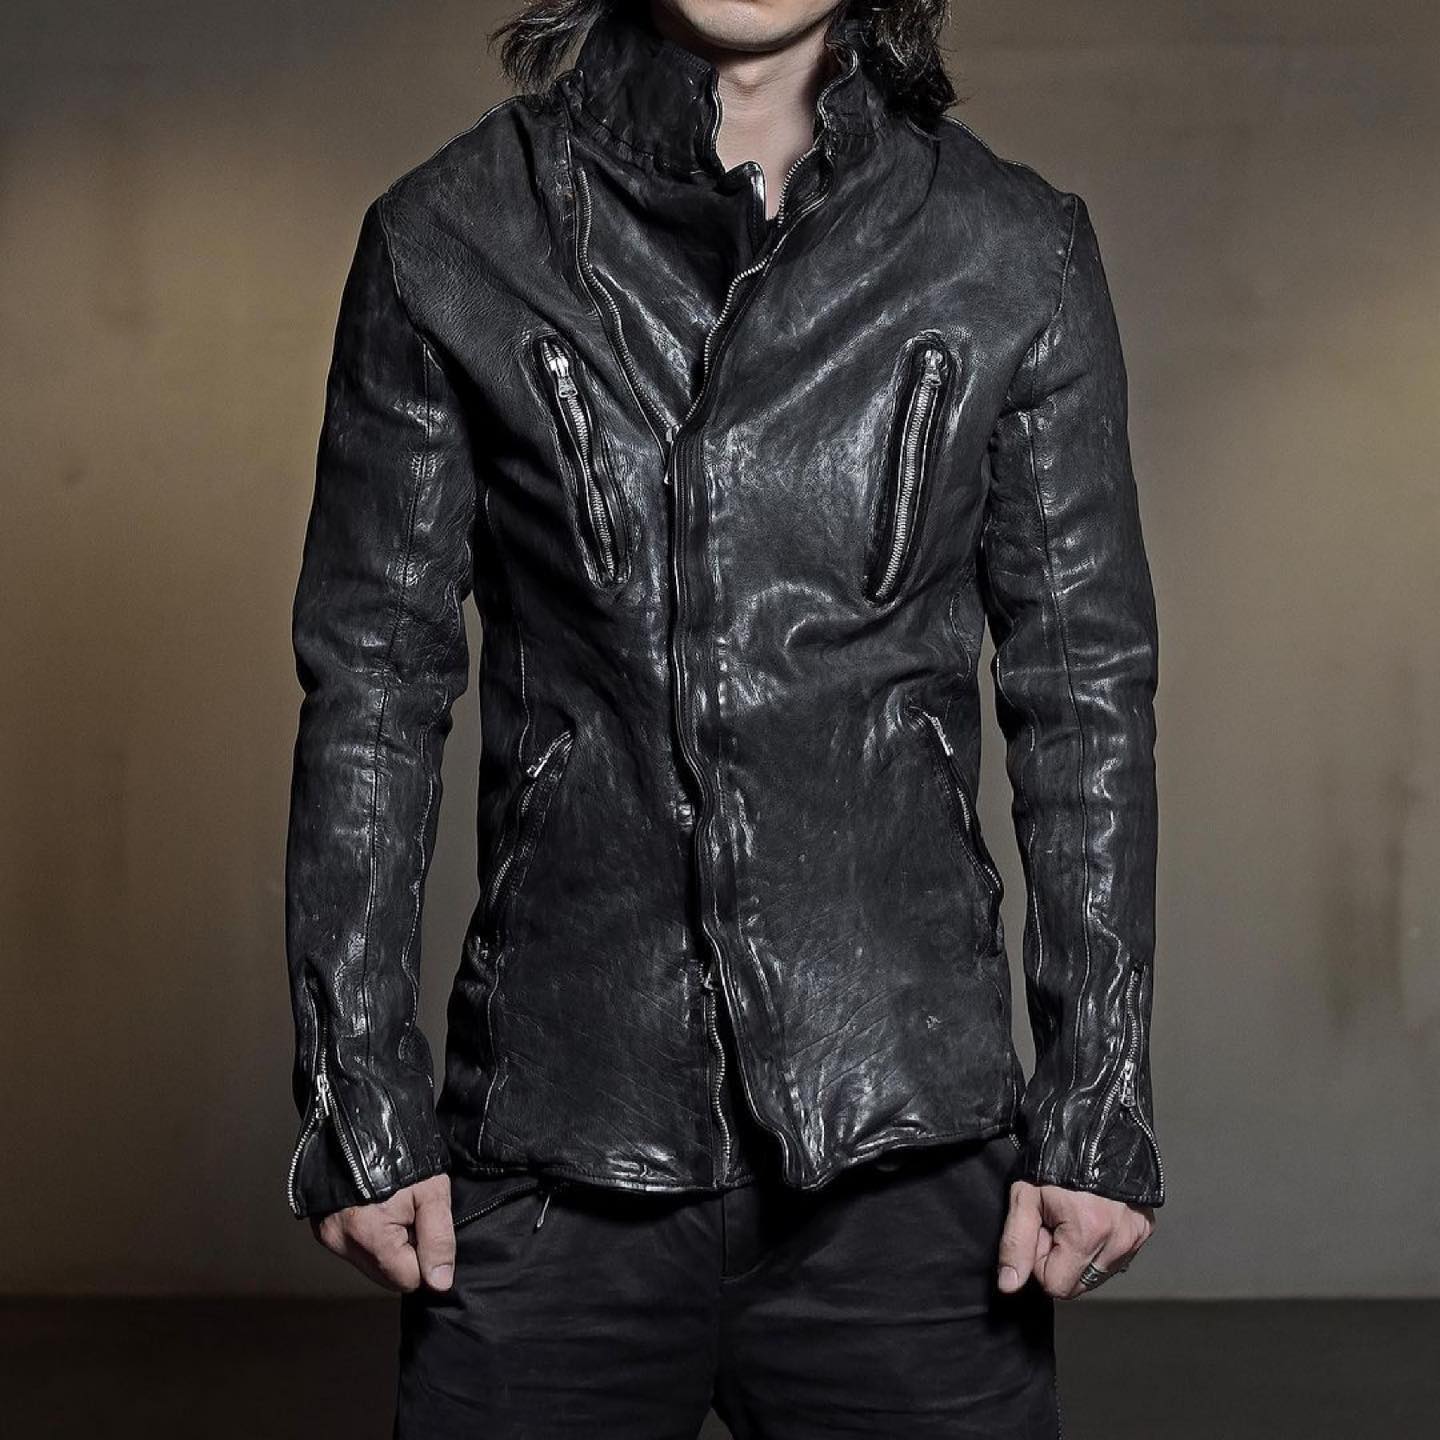 Backlash xx Incarnation sp collaboration leather jacket. In store now ...